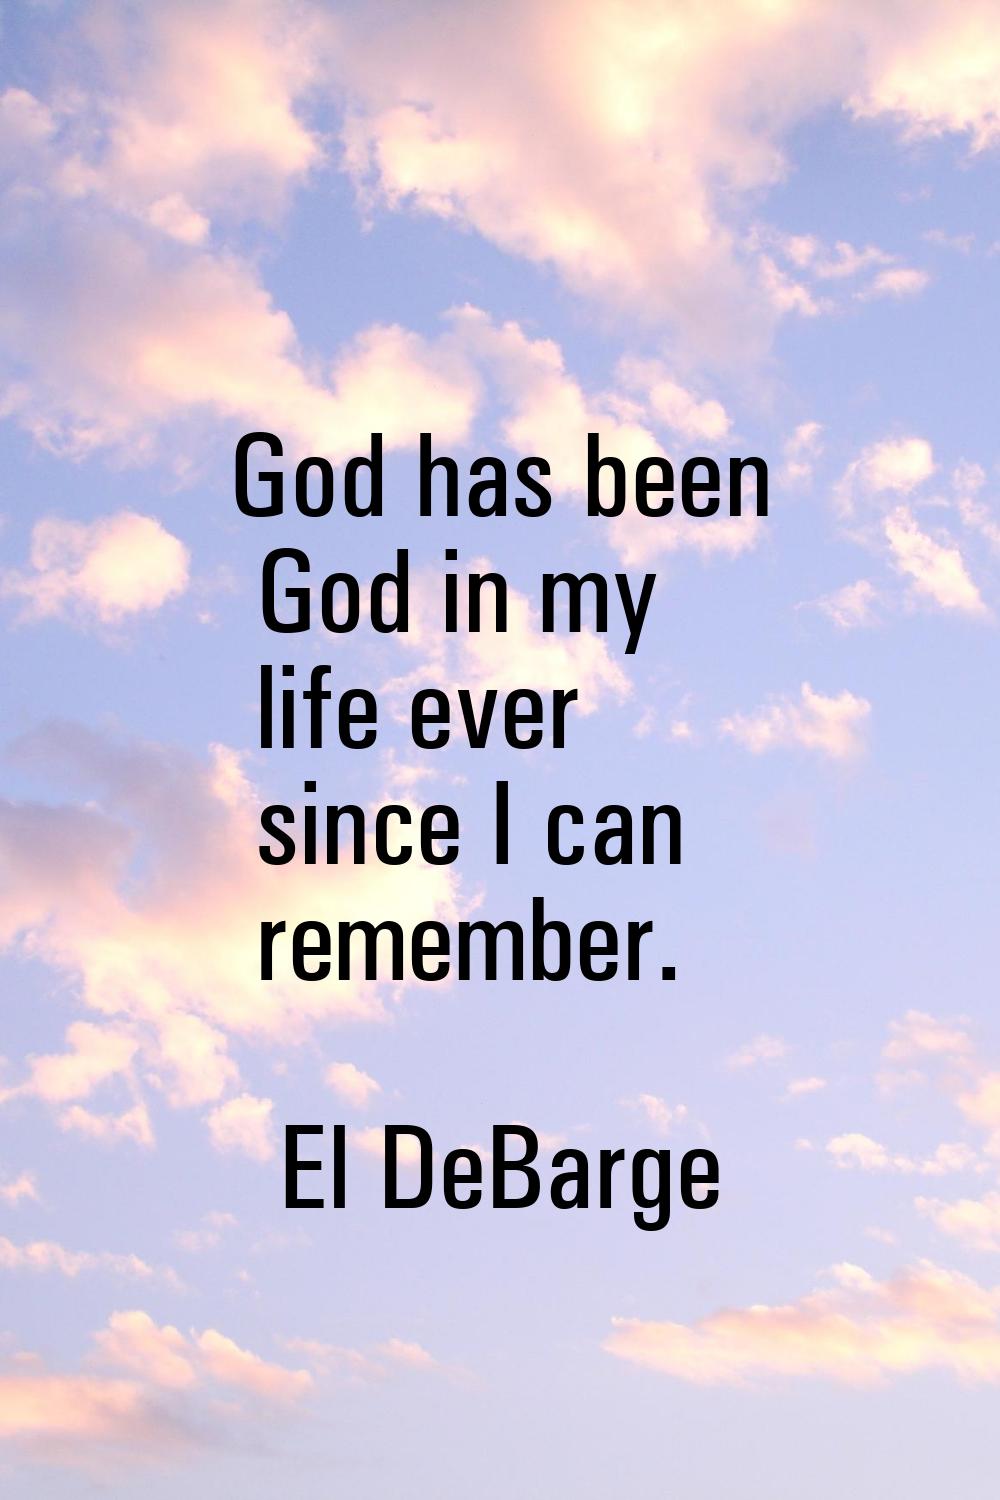 God has been God in my life ever since I can remember.